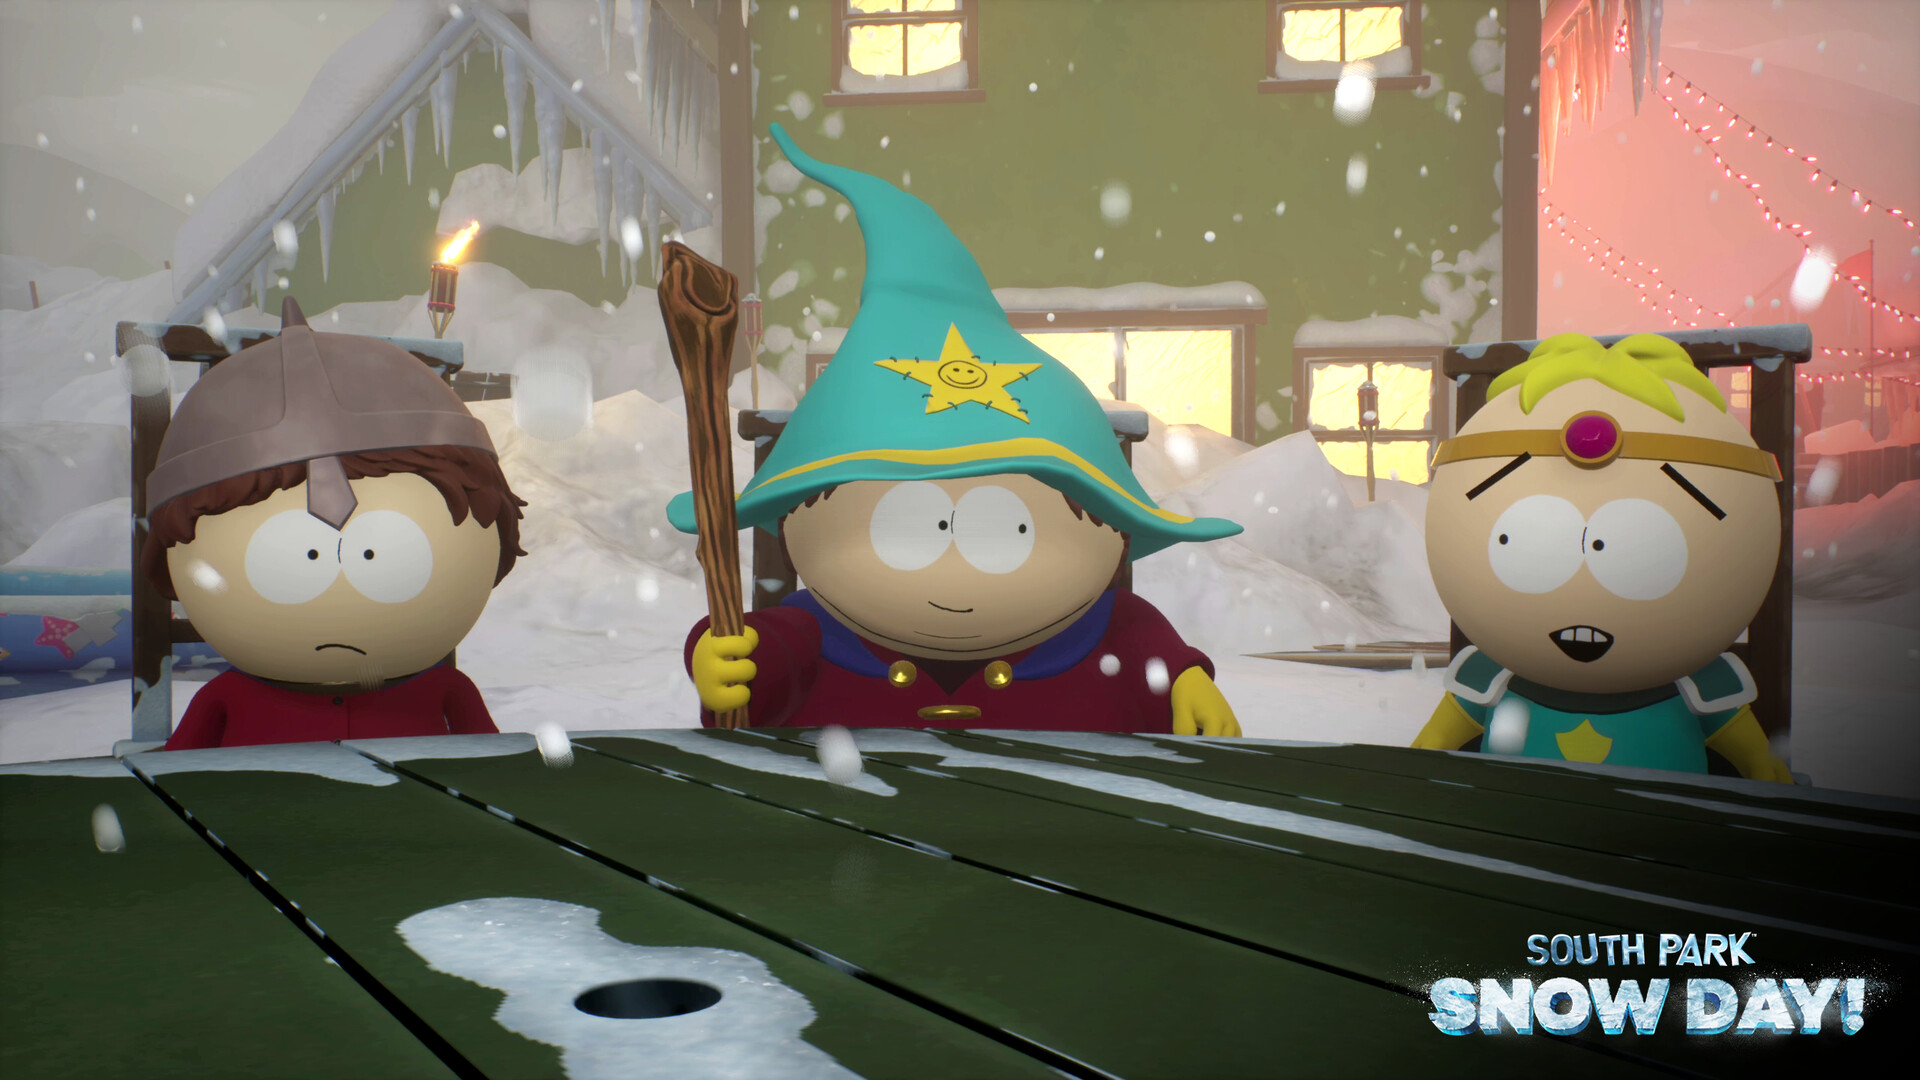 South Park: Snow Day! Playstation 5 Account